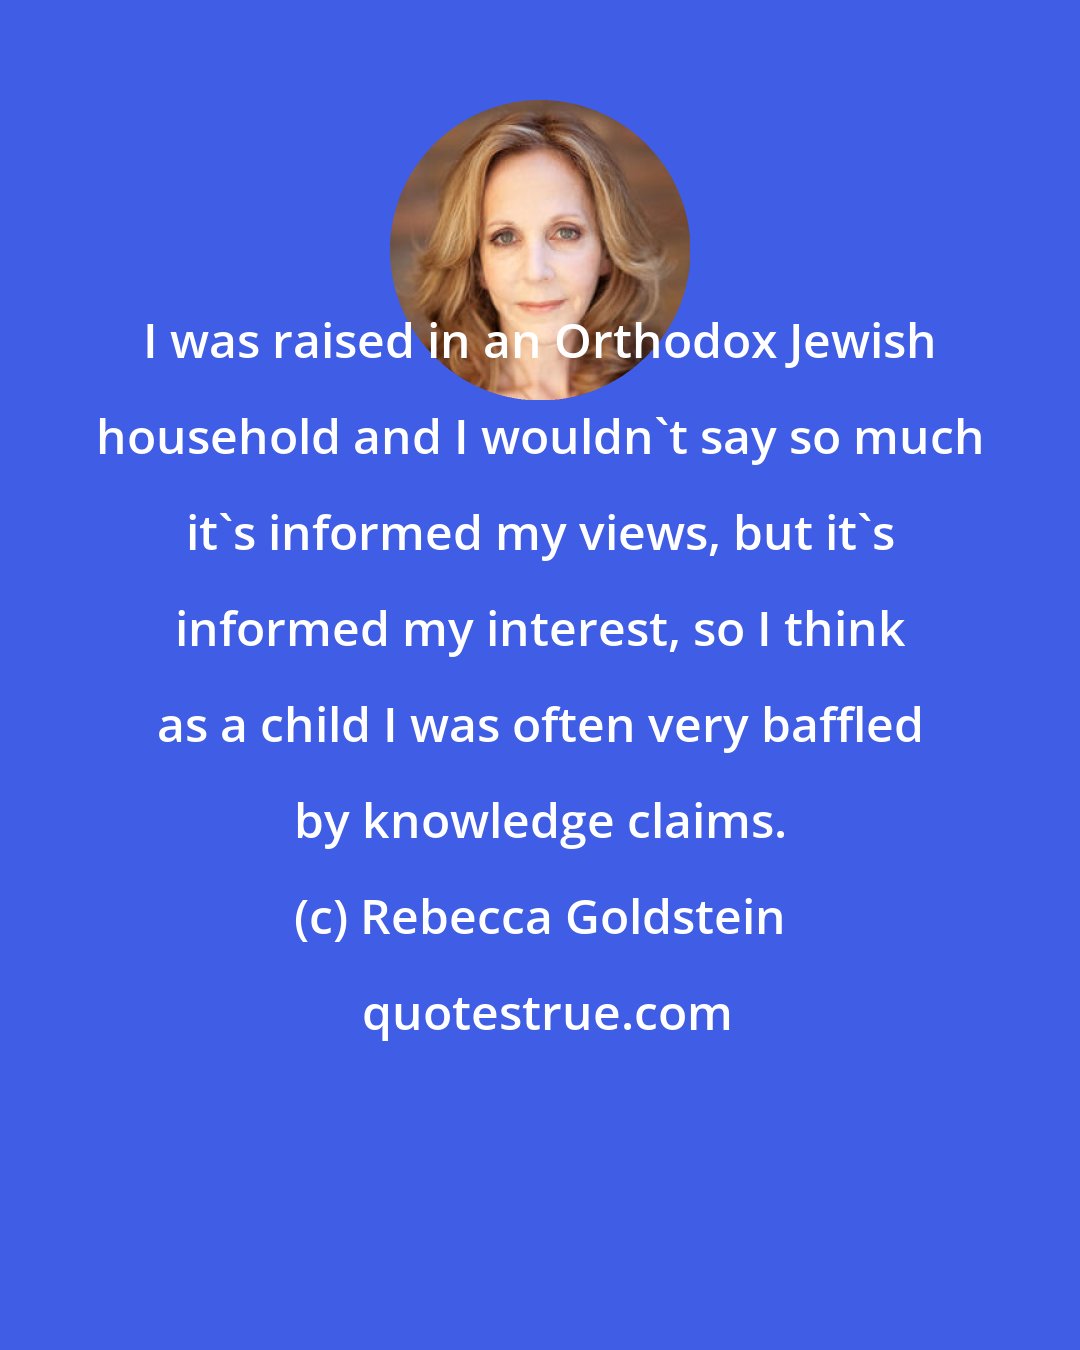 Rebecca Goldstein: I was raised in an Orthodox Jewish household and I wouldn't say so much it's informed my views, but it's informed my interest, so I think as a child I was often very baffled by knowledge claims.